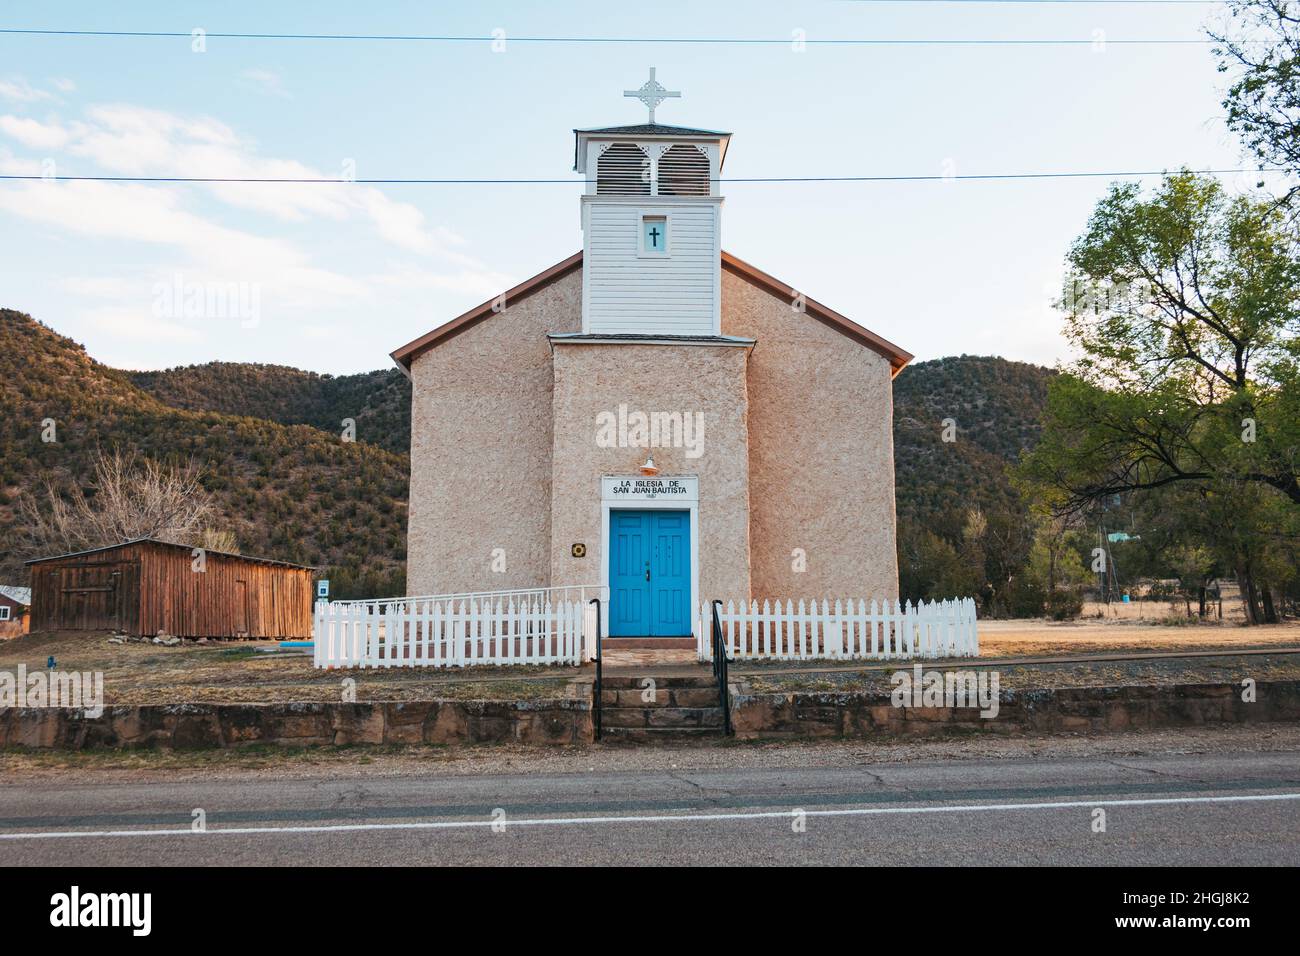 La Iglesia De San Juan Bautista churchm completed 1887 in Lincoln Historic District, an Old West town in New Mexico, United States Stock Photo